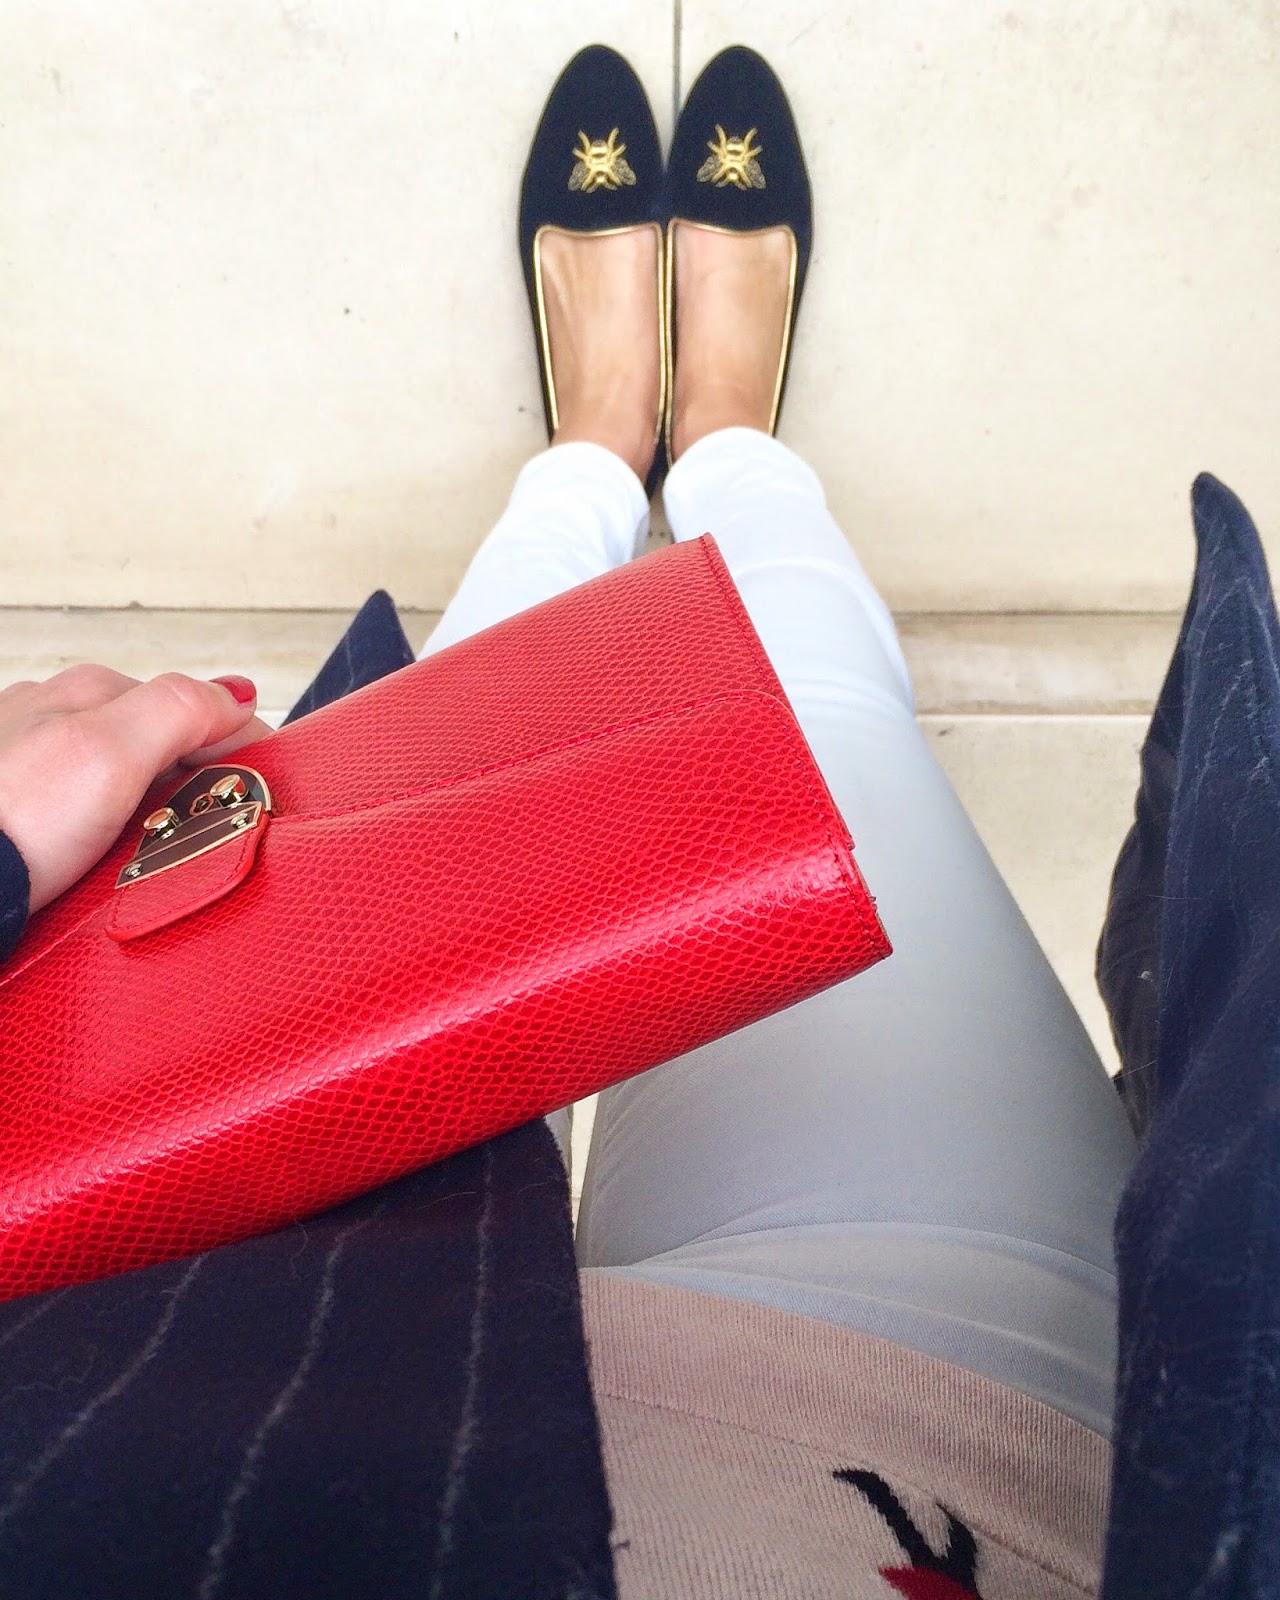 aspinal of london bag, aspinal of london clutch, red clutch, pinstriped coat, white skinny jeans, winter white look, ted baker jumper, j brand jeans white